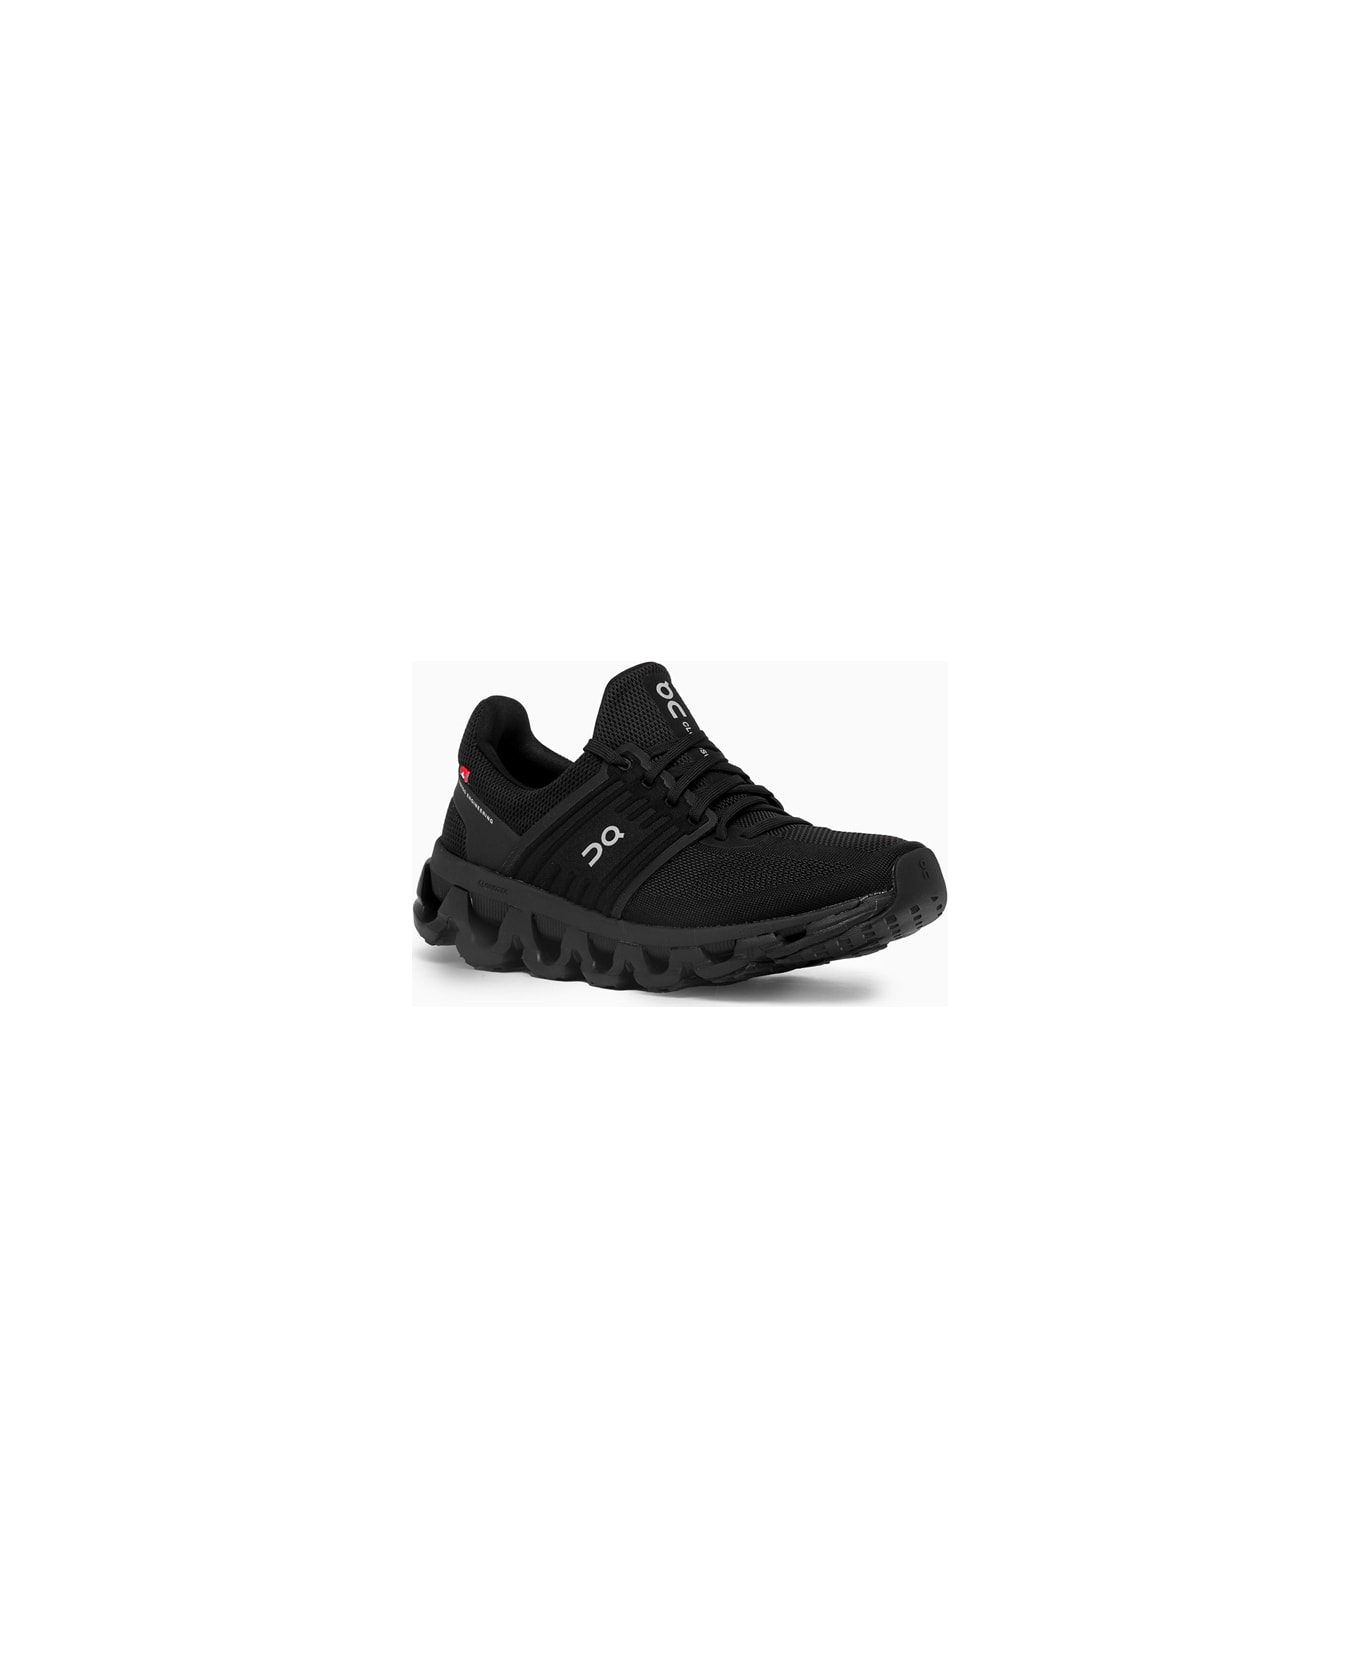 ON Cloudswift 3 Ad Sneakers 3wd10150485 - Nero